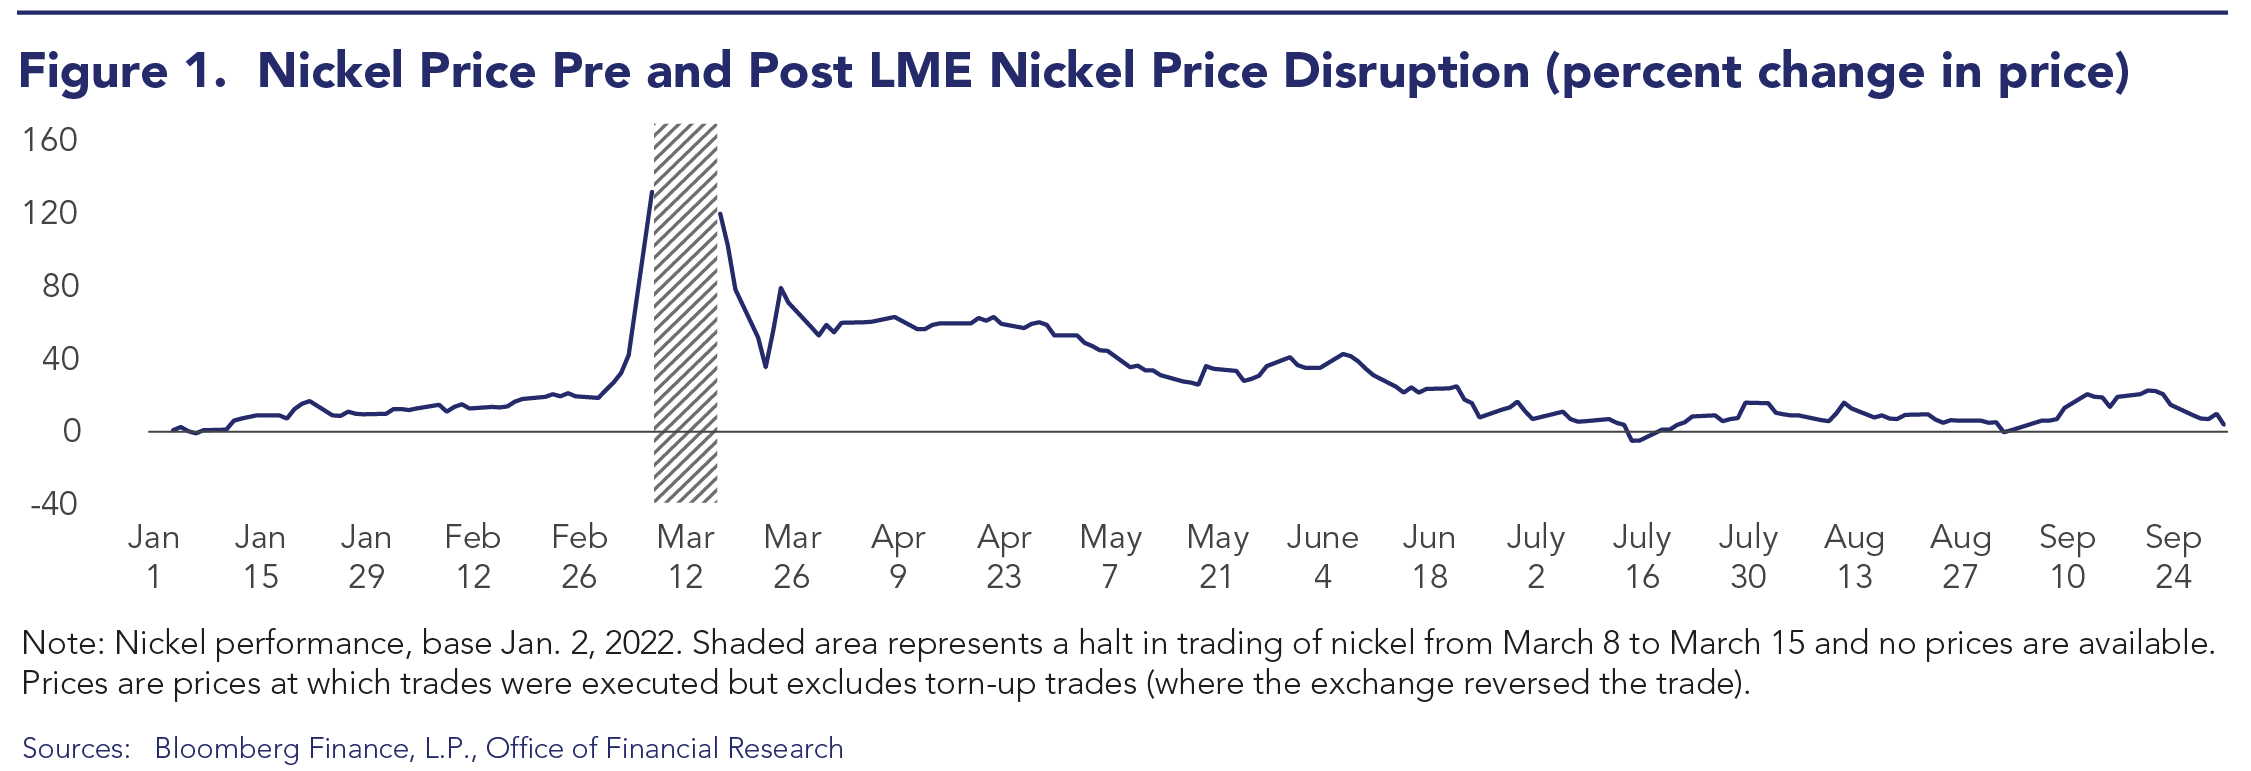 London Metal Exchange nickel prices rapidly rose in early March 2022 before a halt on nickel trading from March 8 to March 15. Prices then sharply fell over the next week when trading resumed, but nickel took until late June 2022 to return to prices similar to January and February 2022.